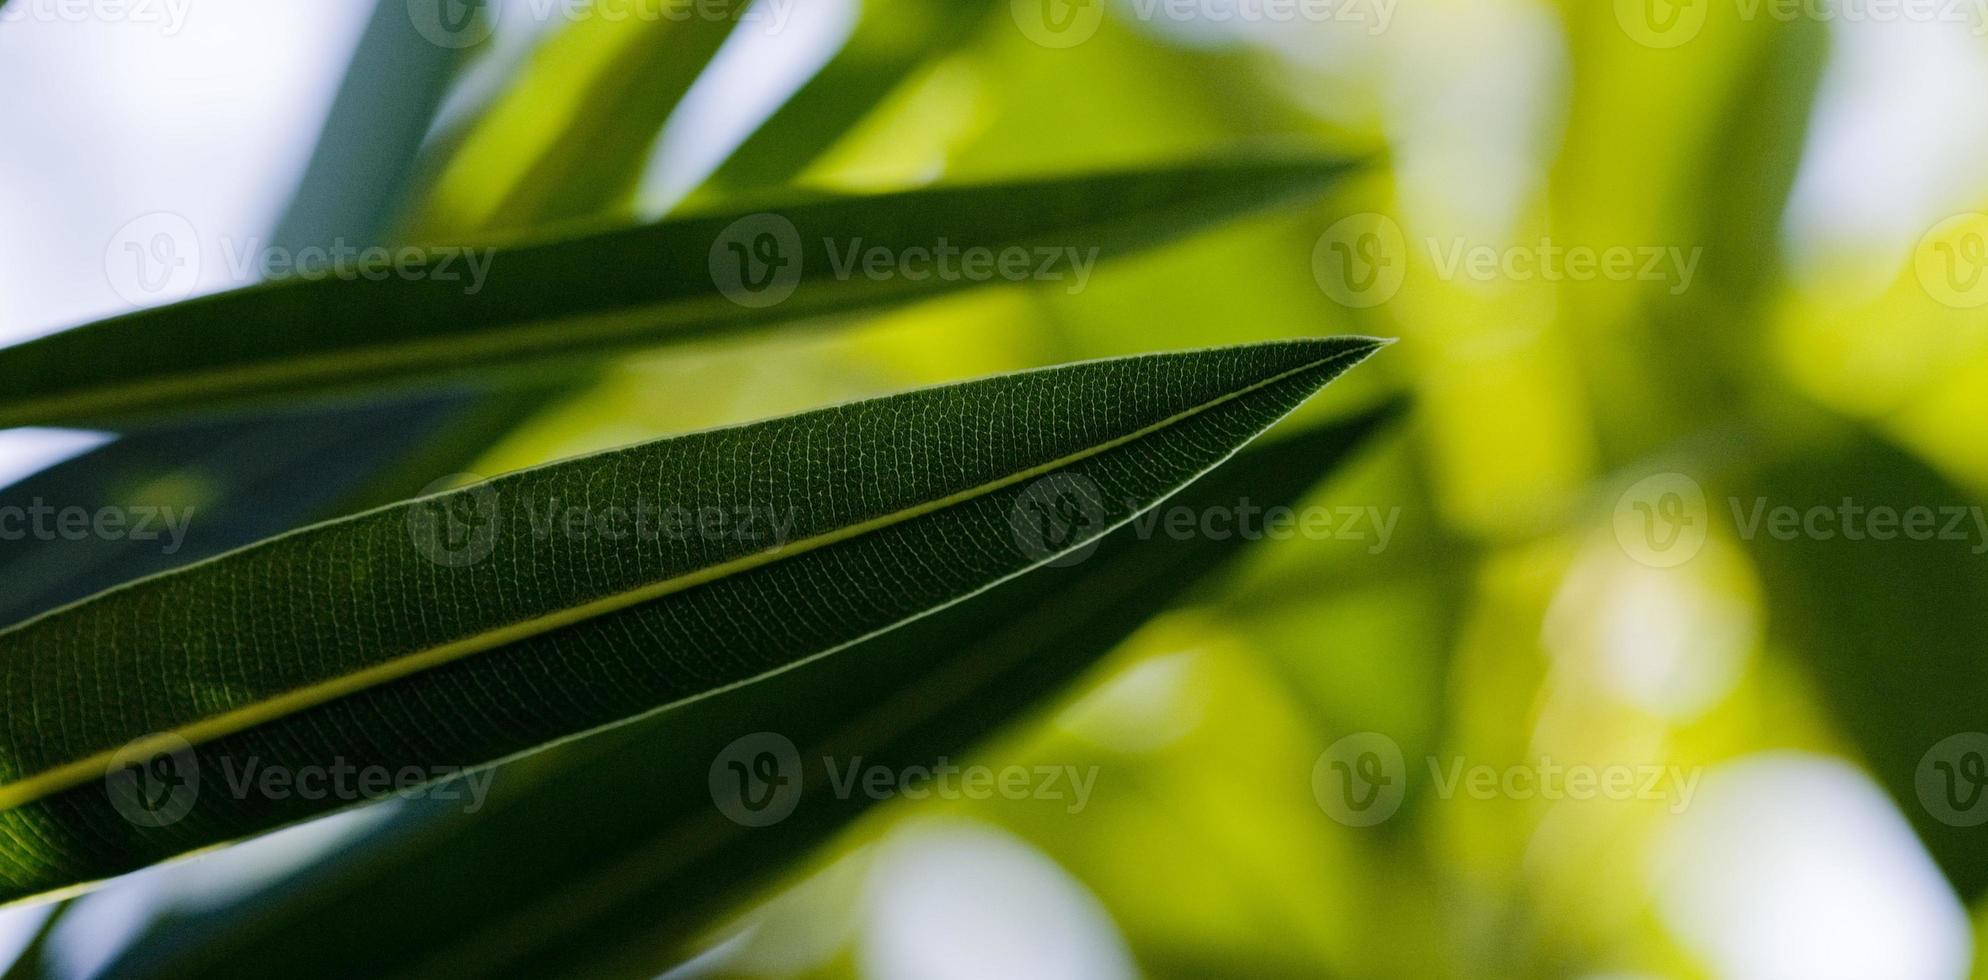 Oleander leaves, the toxic plant that abounds all over, Madrid Spain photo